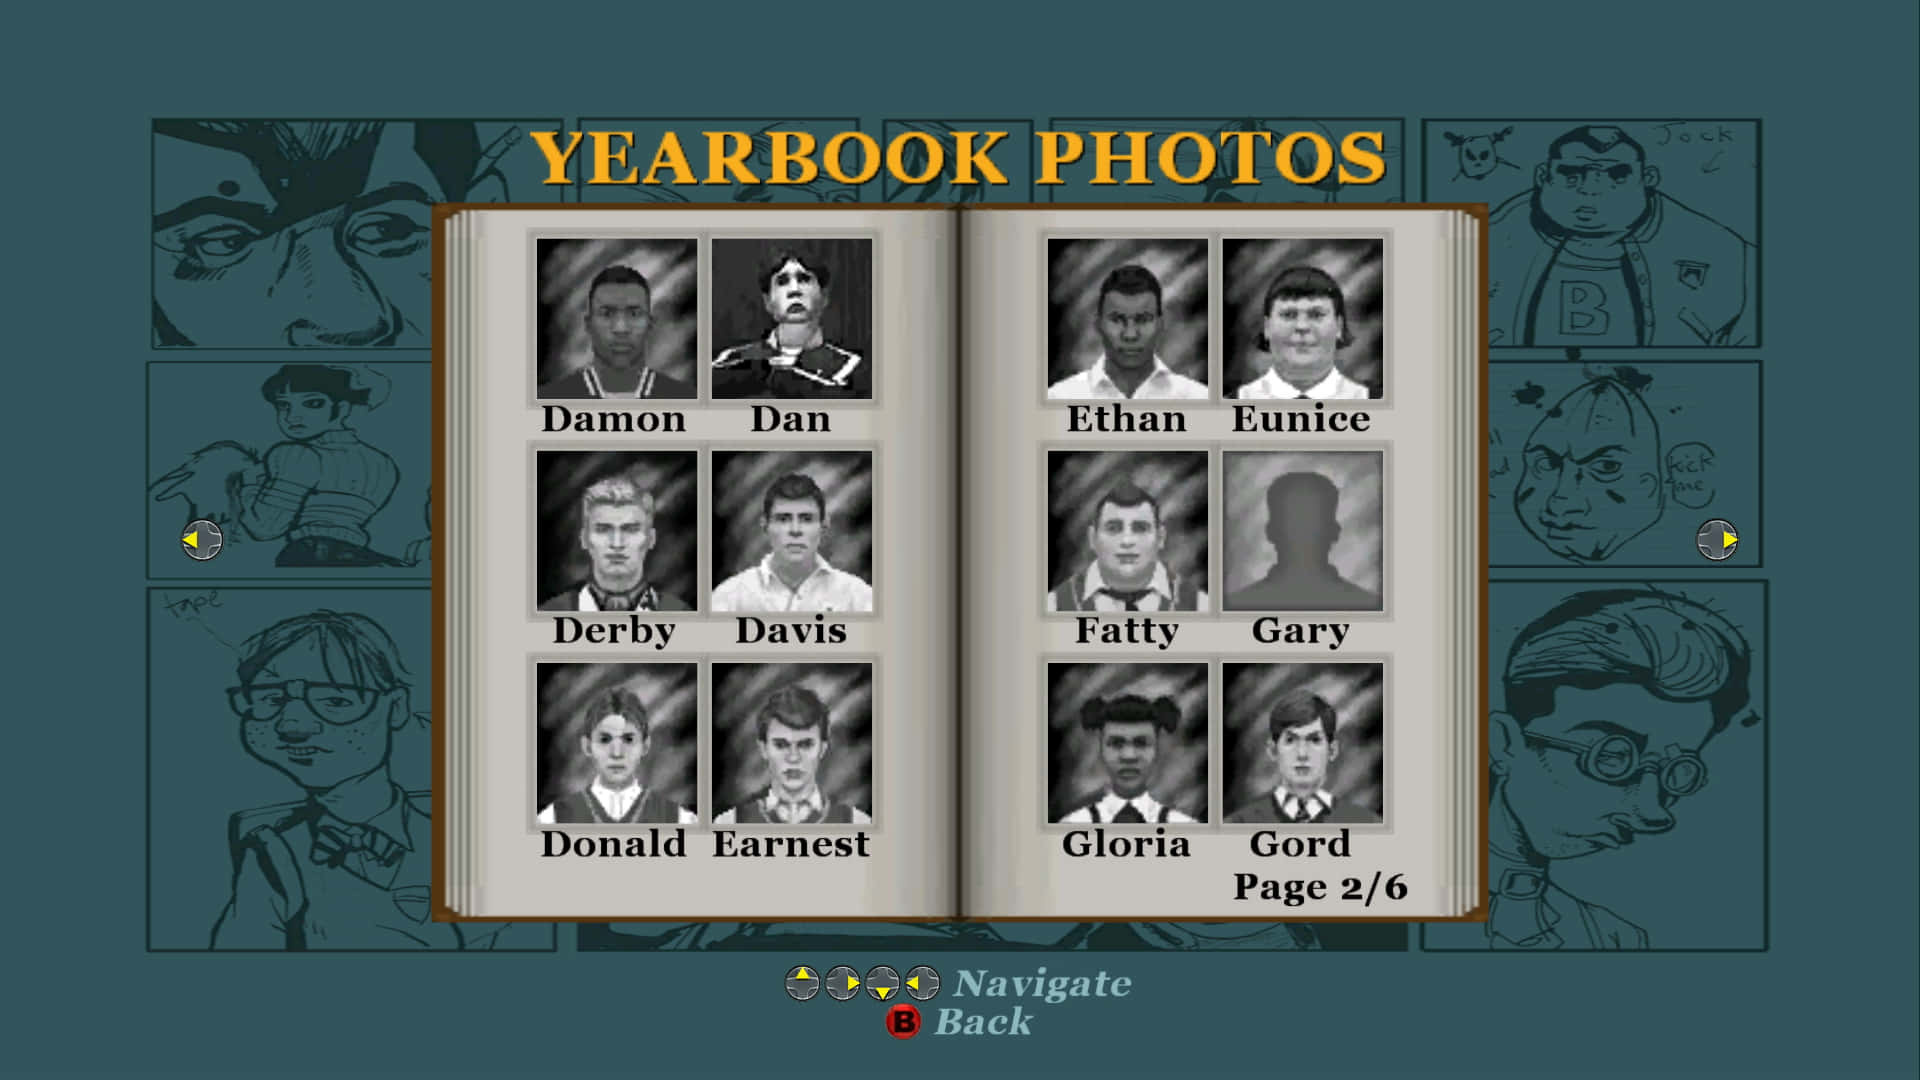 a screen shot of the yearbook photos